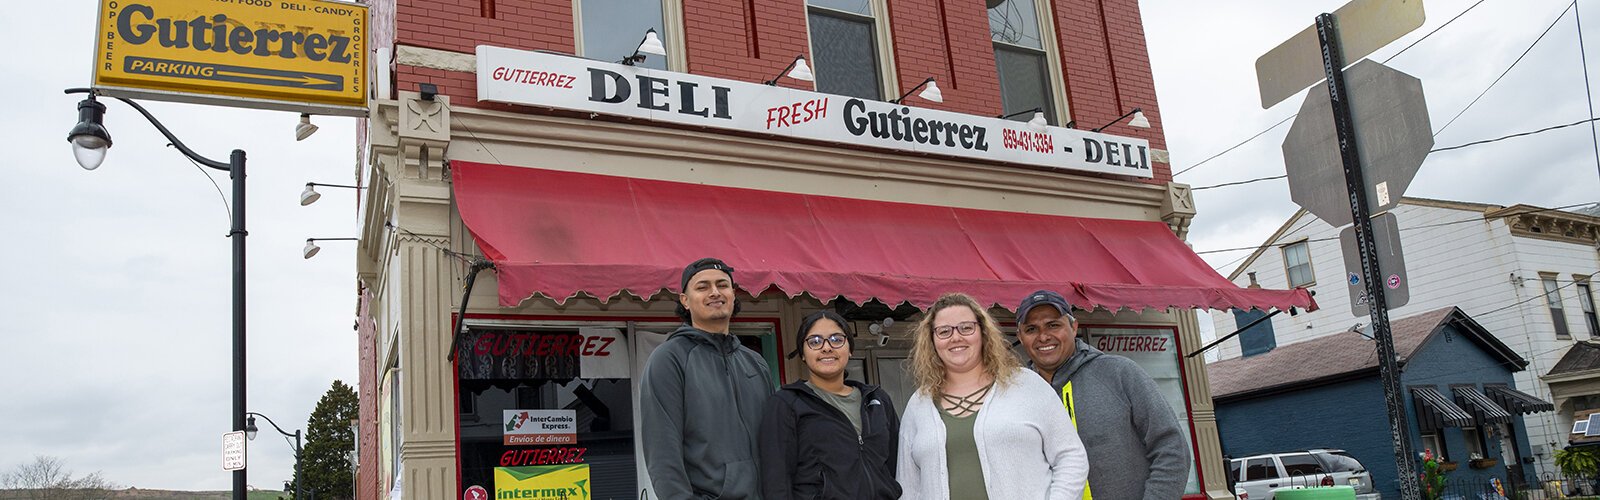 Gutierrez Deli has become a gathering place and resource for Covington's Latino residents. The Gutierrez family: Sergio, Evelyn, Courtney Case and Claudio.